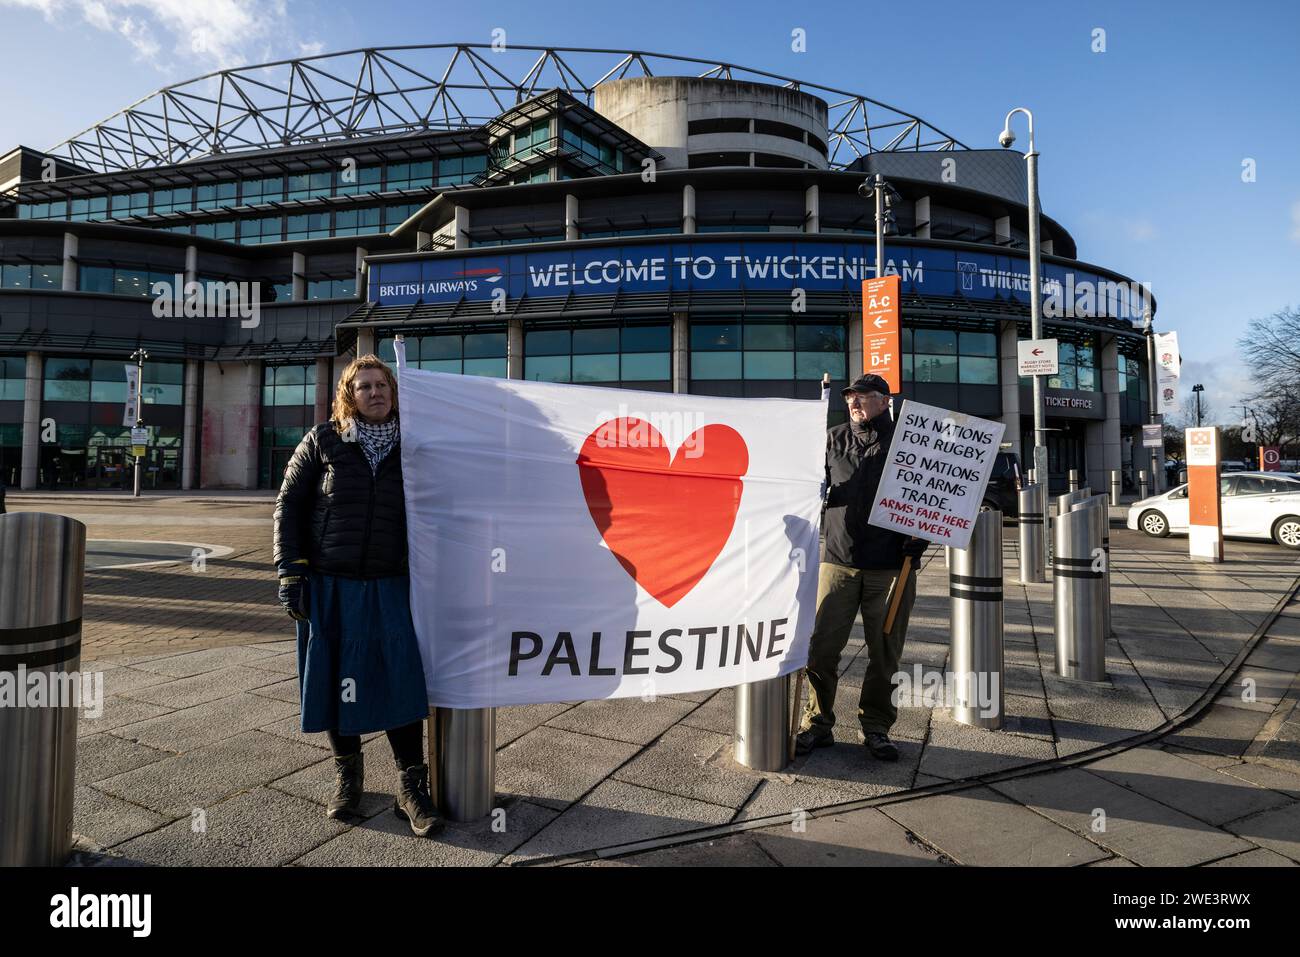 Pro-Palestine protesters PALESTINE ACTION take part in a demonstrations against military arms exhibition at Twickenham Rugby Stadium, Southwest London. Stock Photo